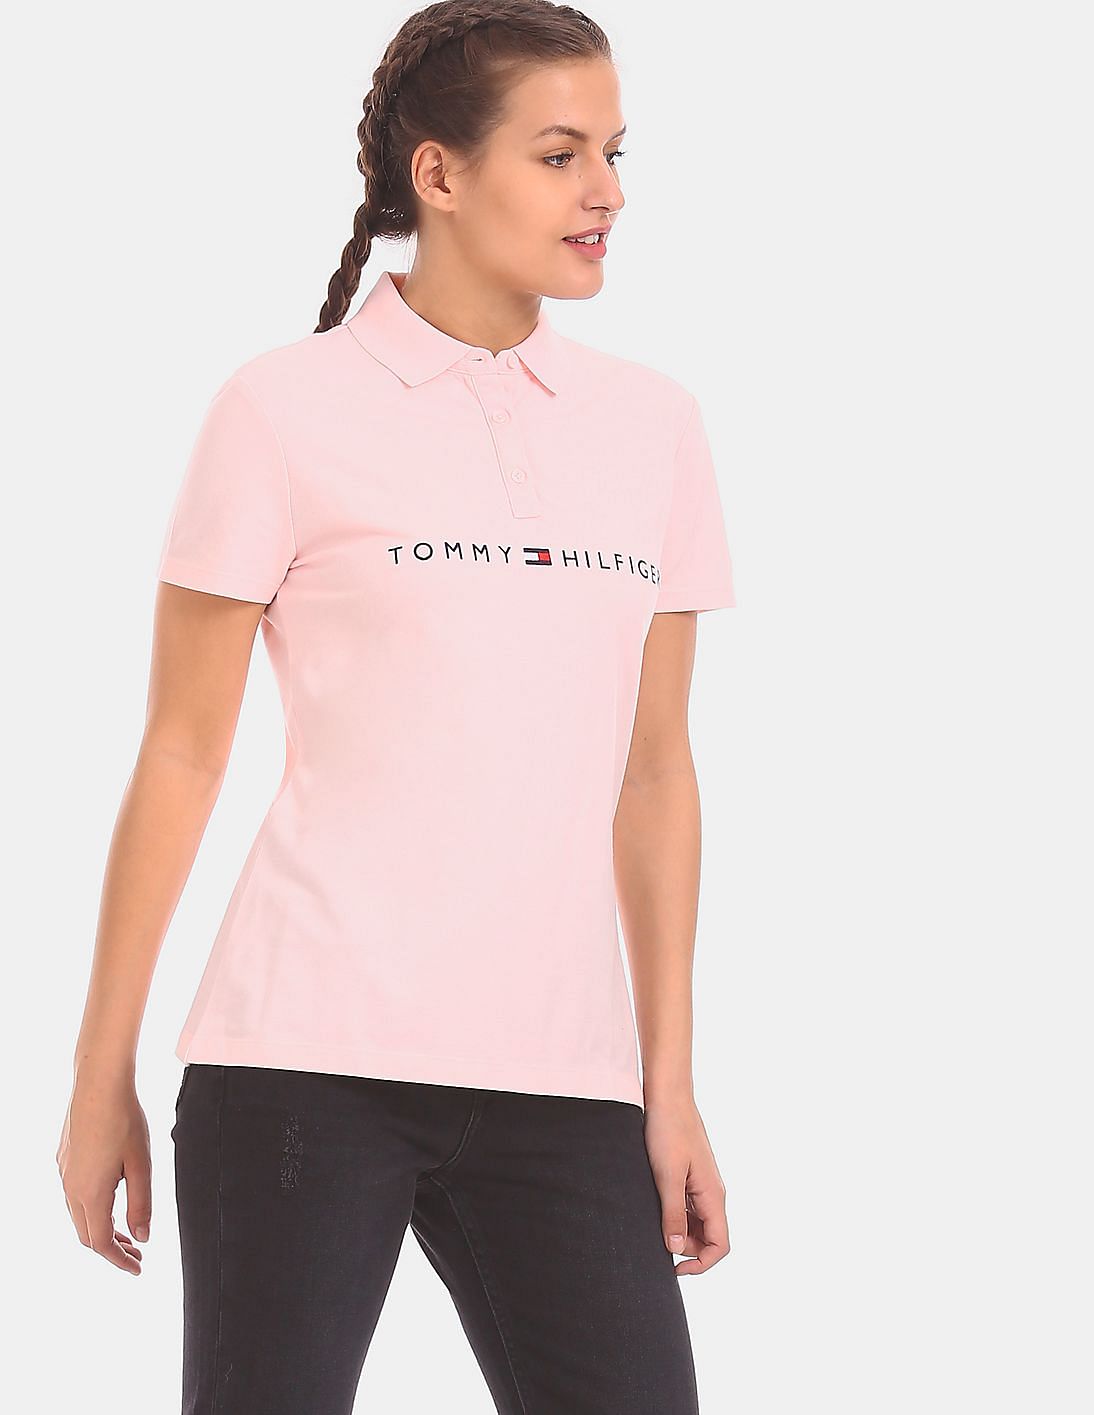 pink polo tommy hilfiger